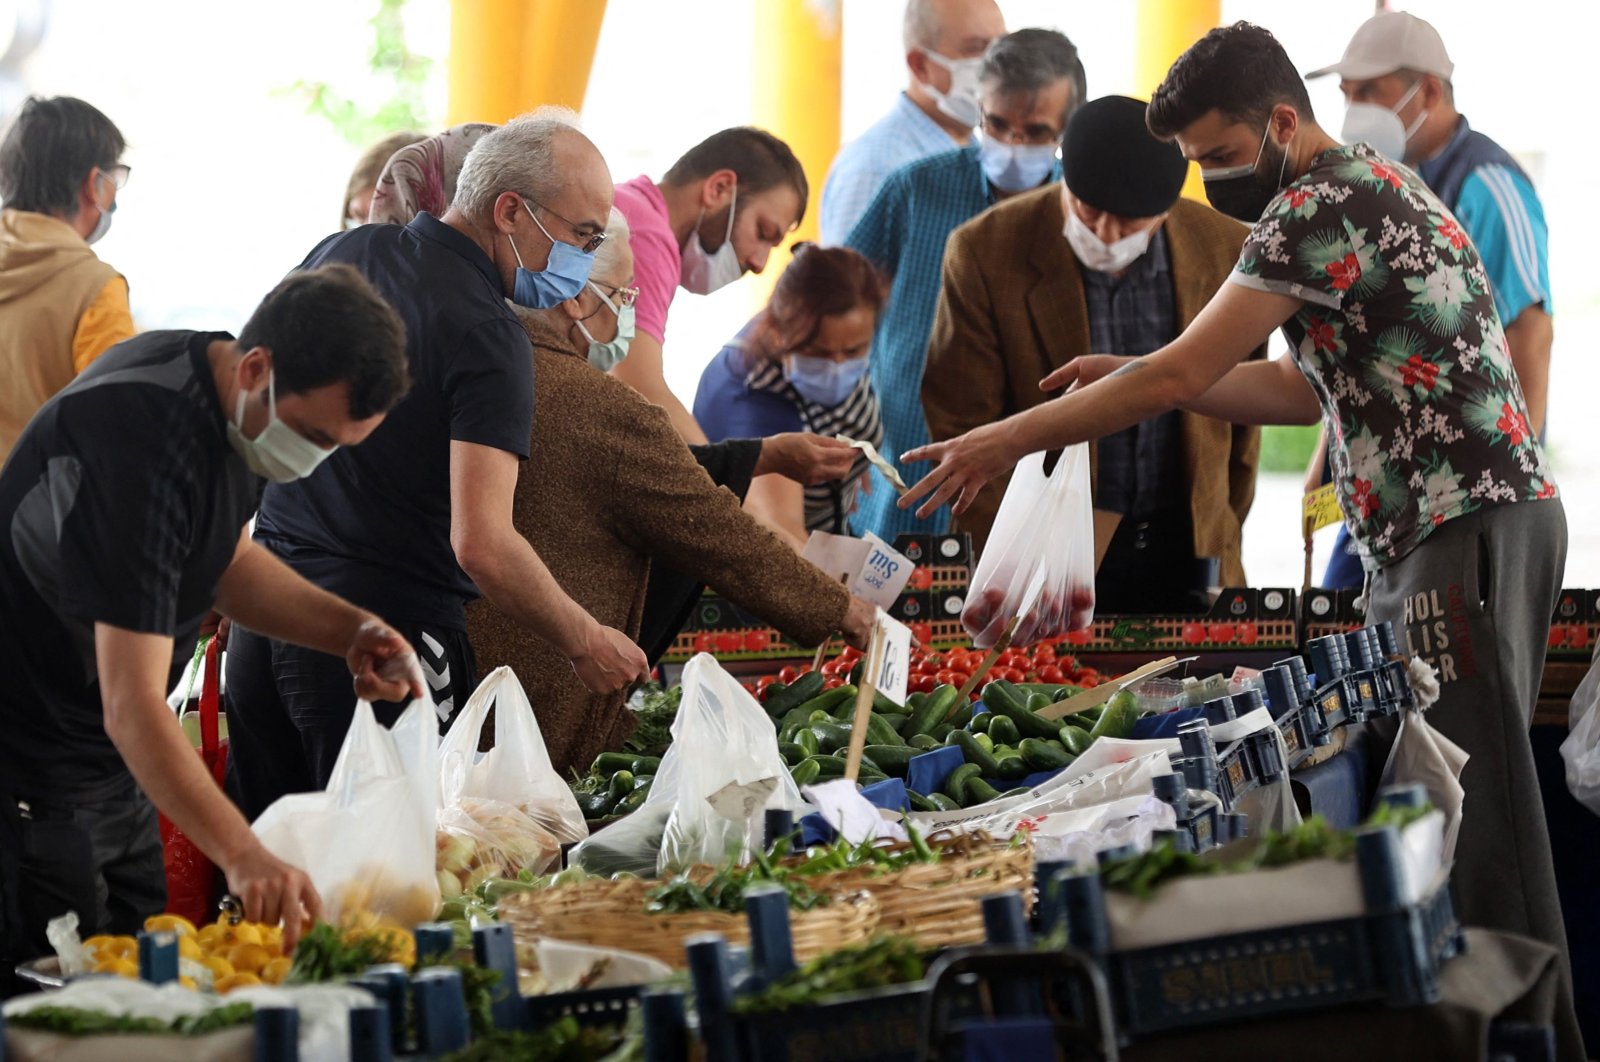 People shop at an open market in the capital, Ankara, Turkey, May 8, 2021. (AFP Photo)